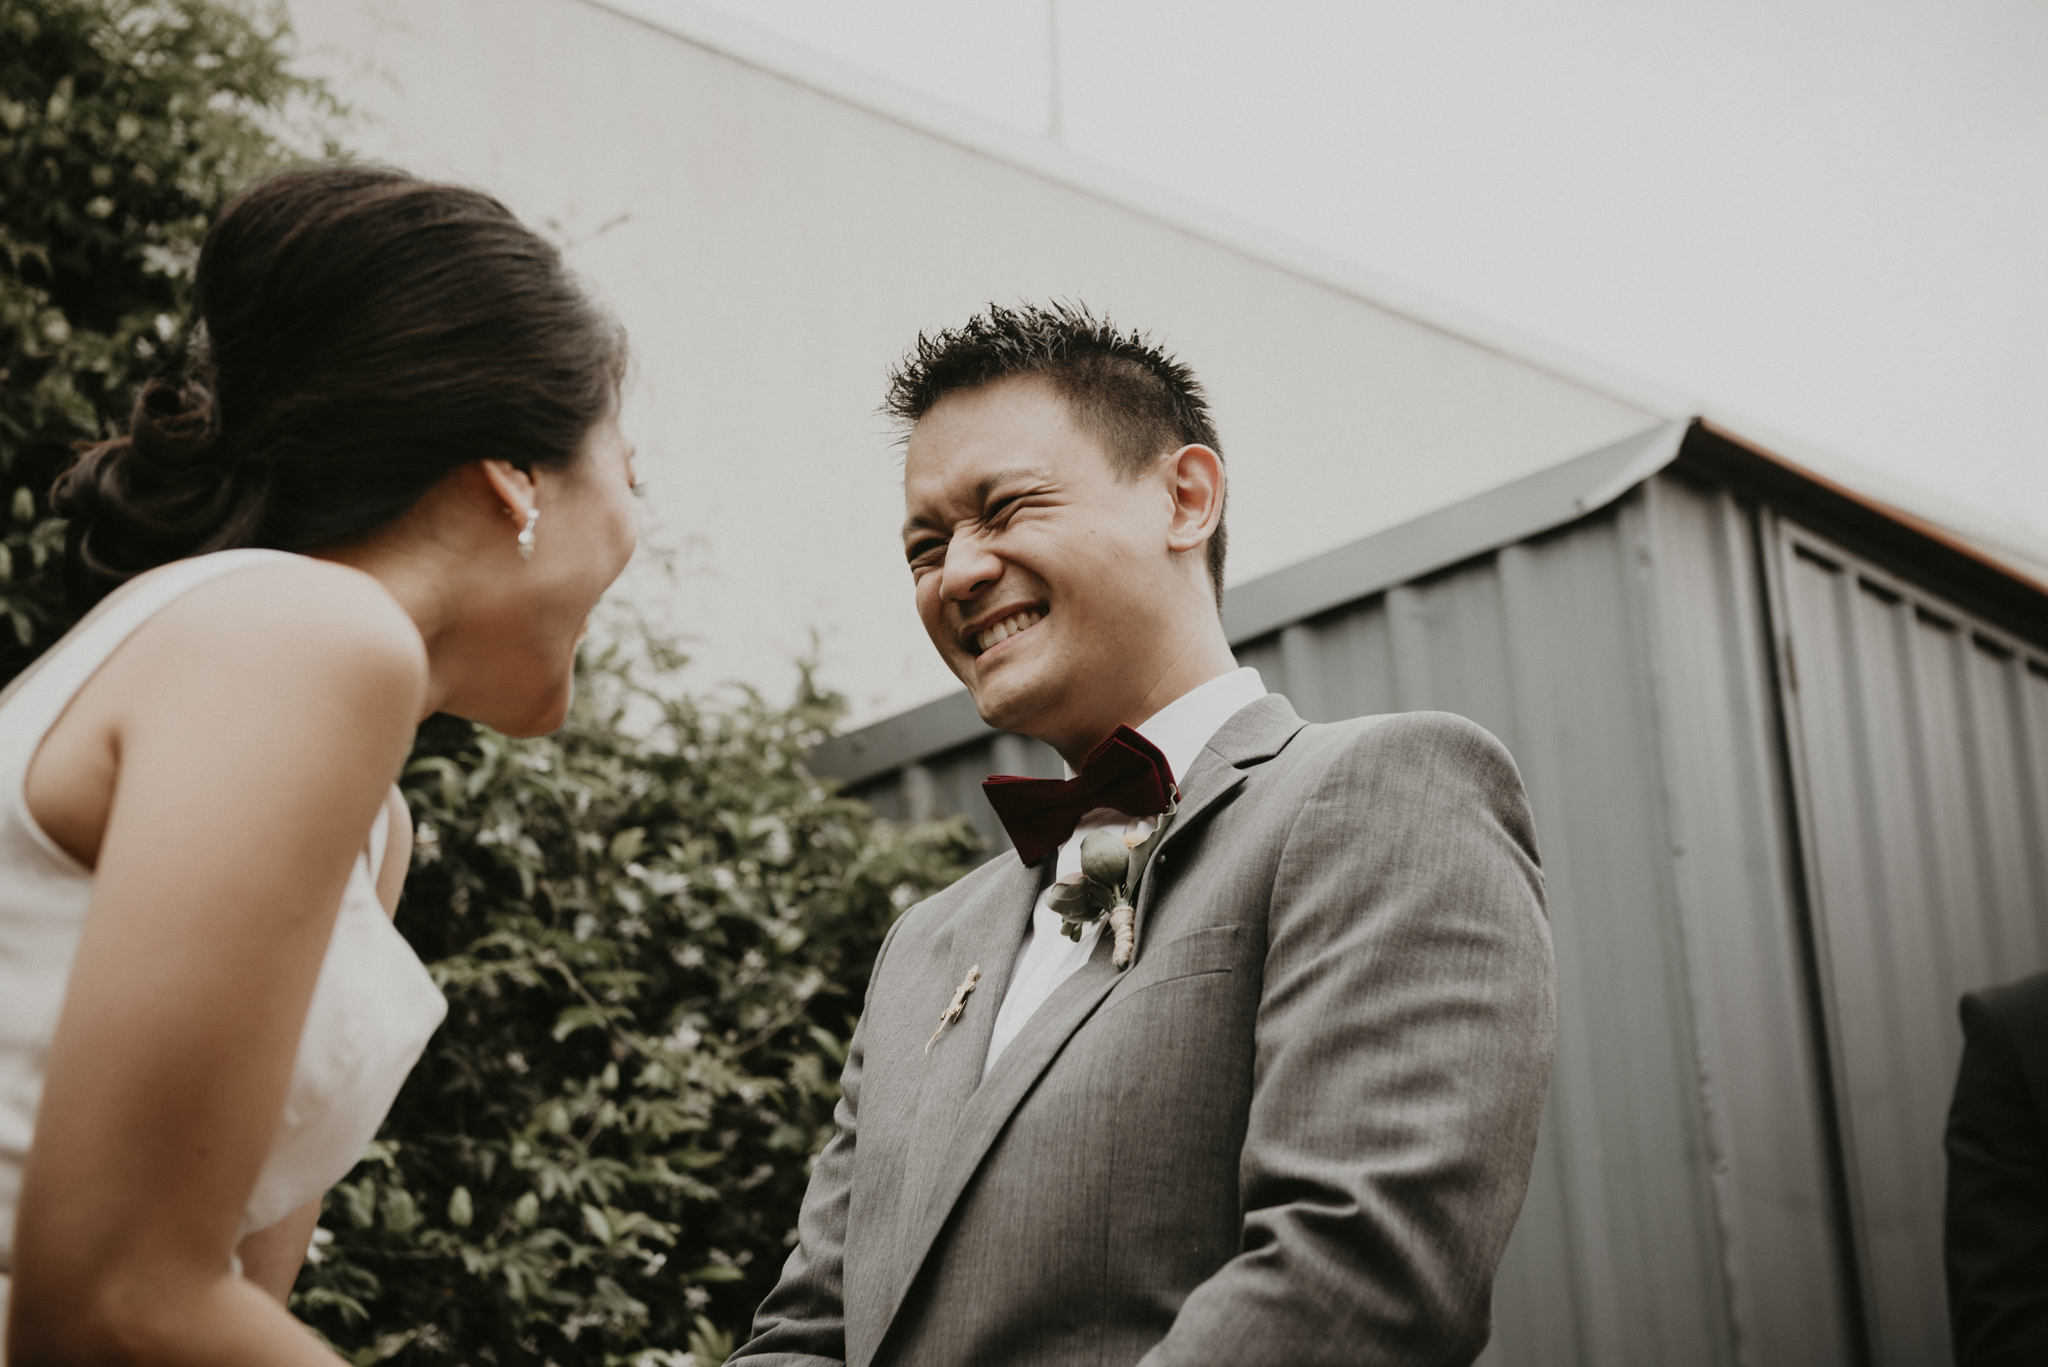 agnes-duy-15th-december-2018-chinese-vietnamese-wedding-tea-ceremony-yarraville-home-house-documentary-candid-photographer-sarah-matler-photography-70